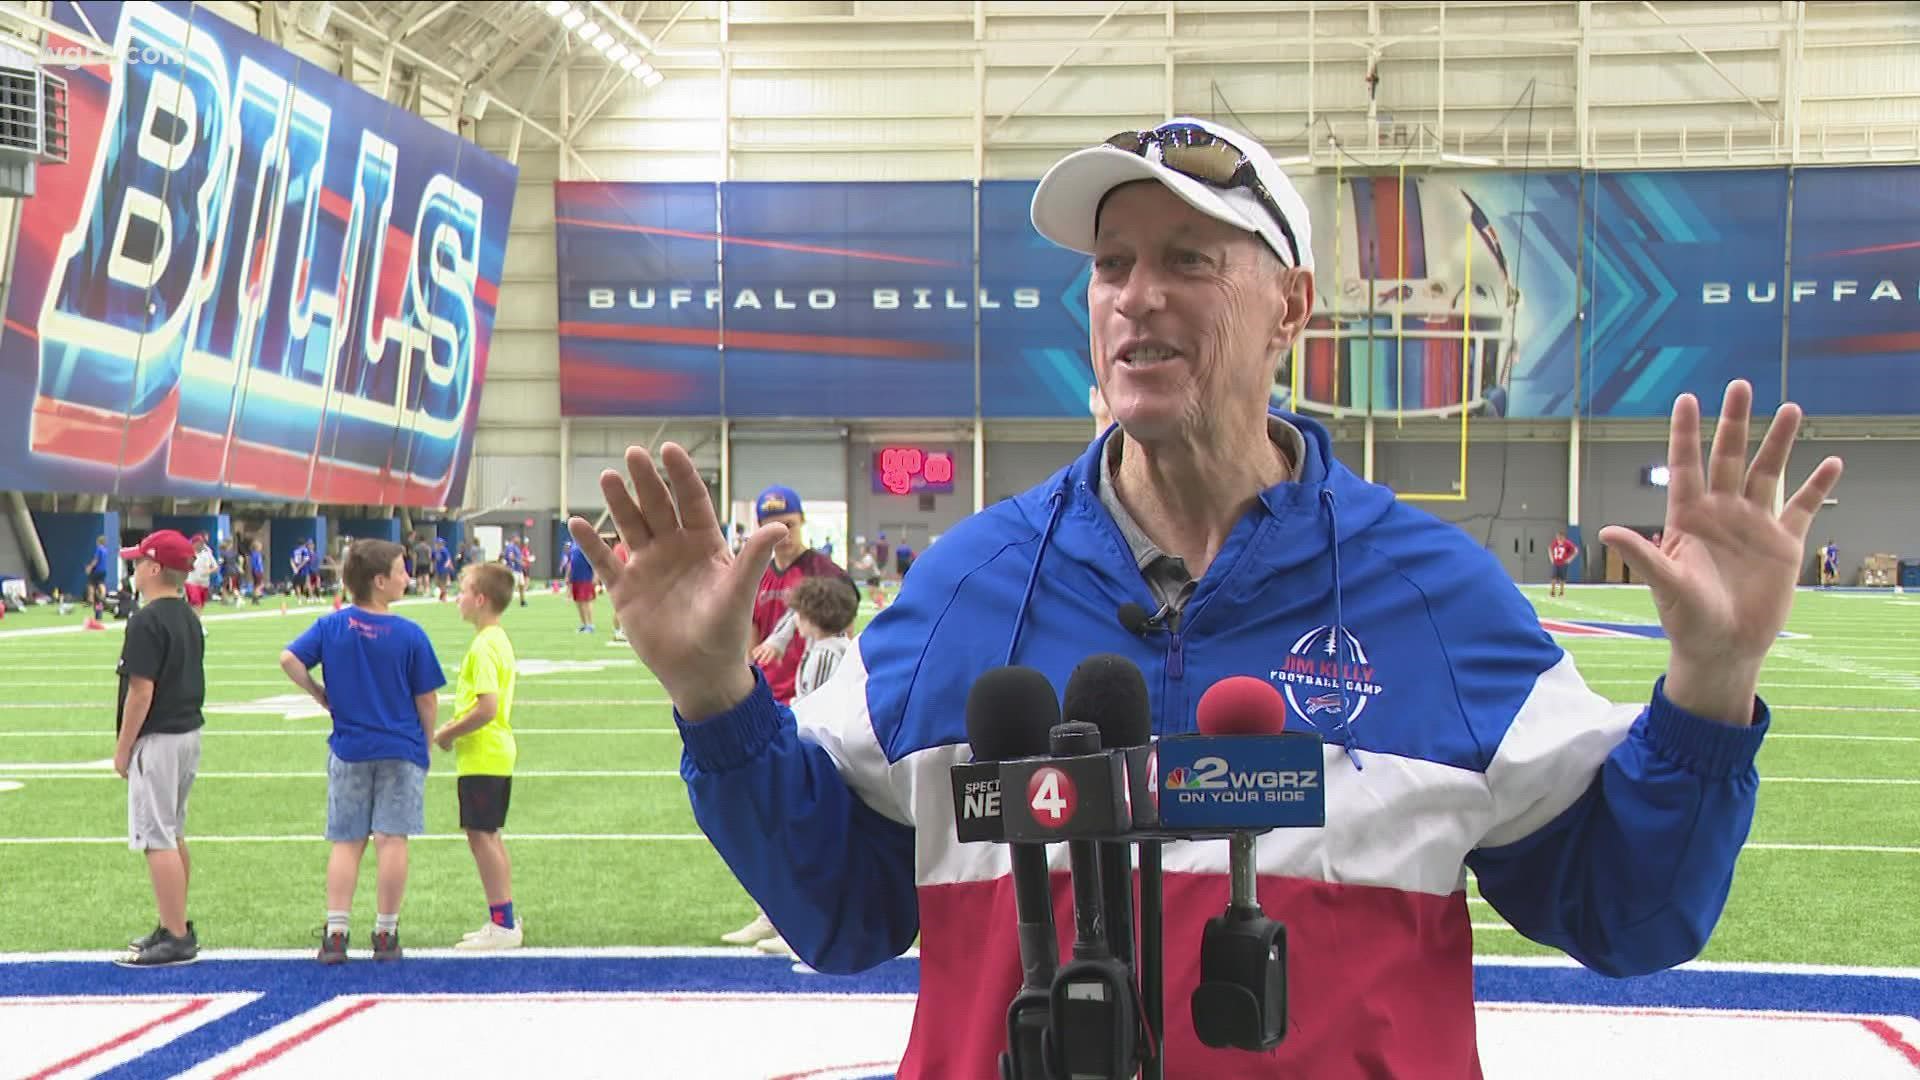 Jim Kelly says he enjoys holding the camp, especially now when most of the kids he's working with weren't even alive when he played.